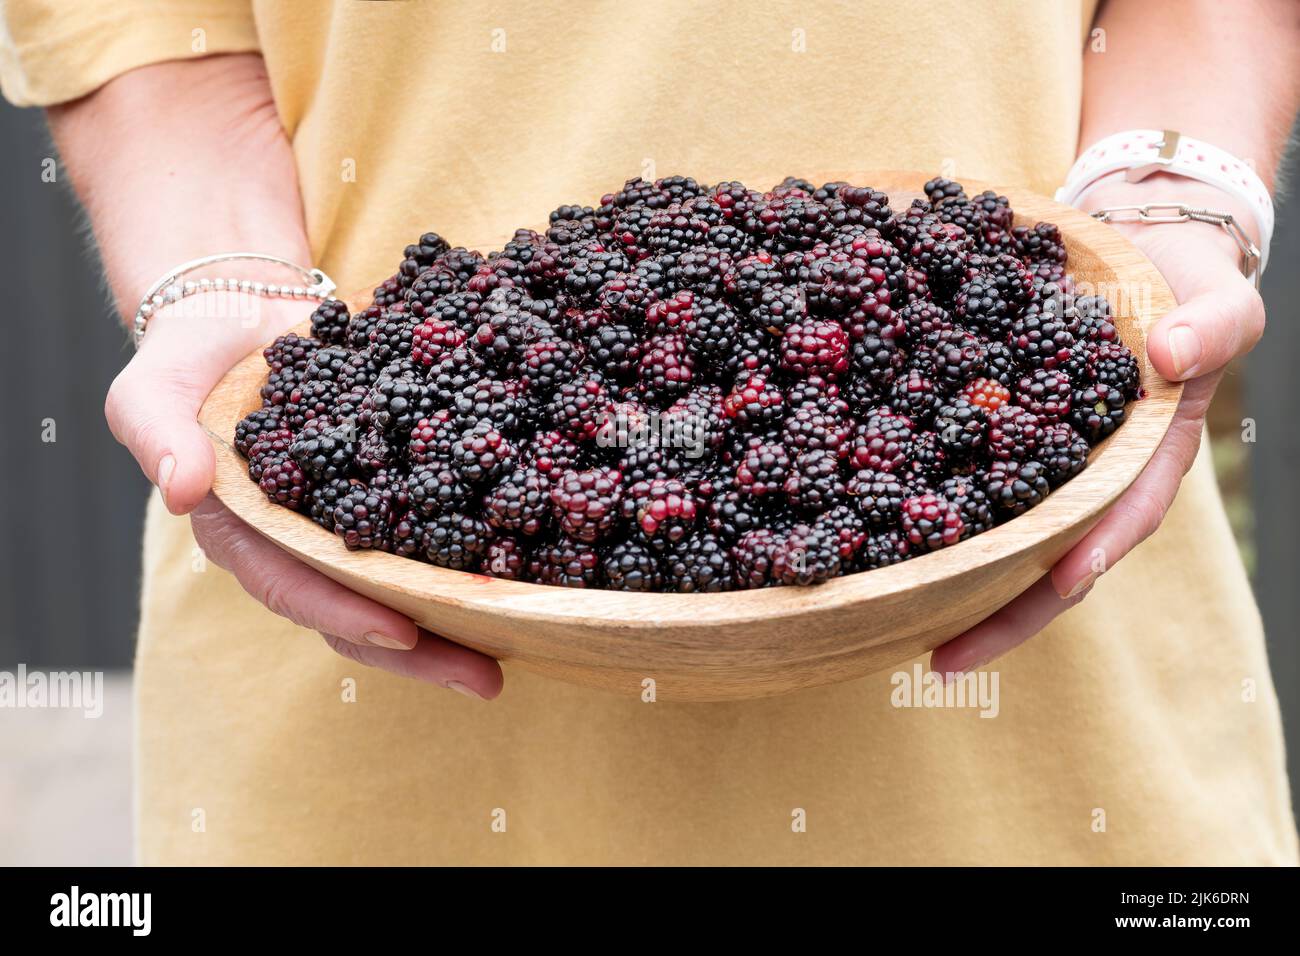 A woman holding a large bowl of wild blackberries, Rubus fruticosus. The juice fruits have been freshly picked from bramble bushes in the countryside Stock Photo